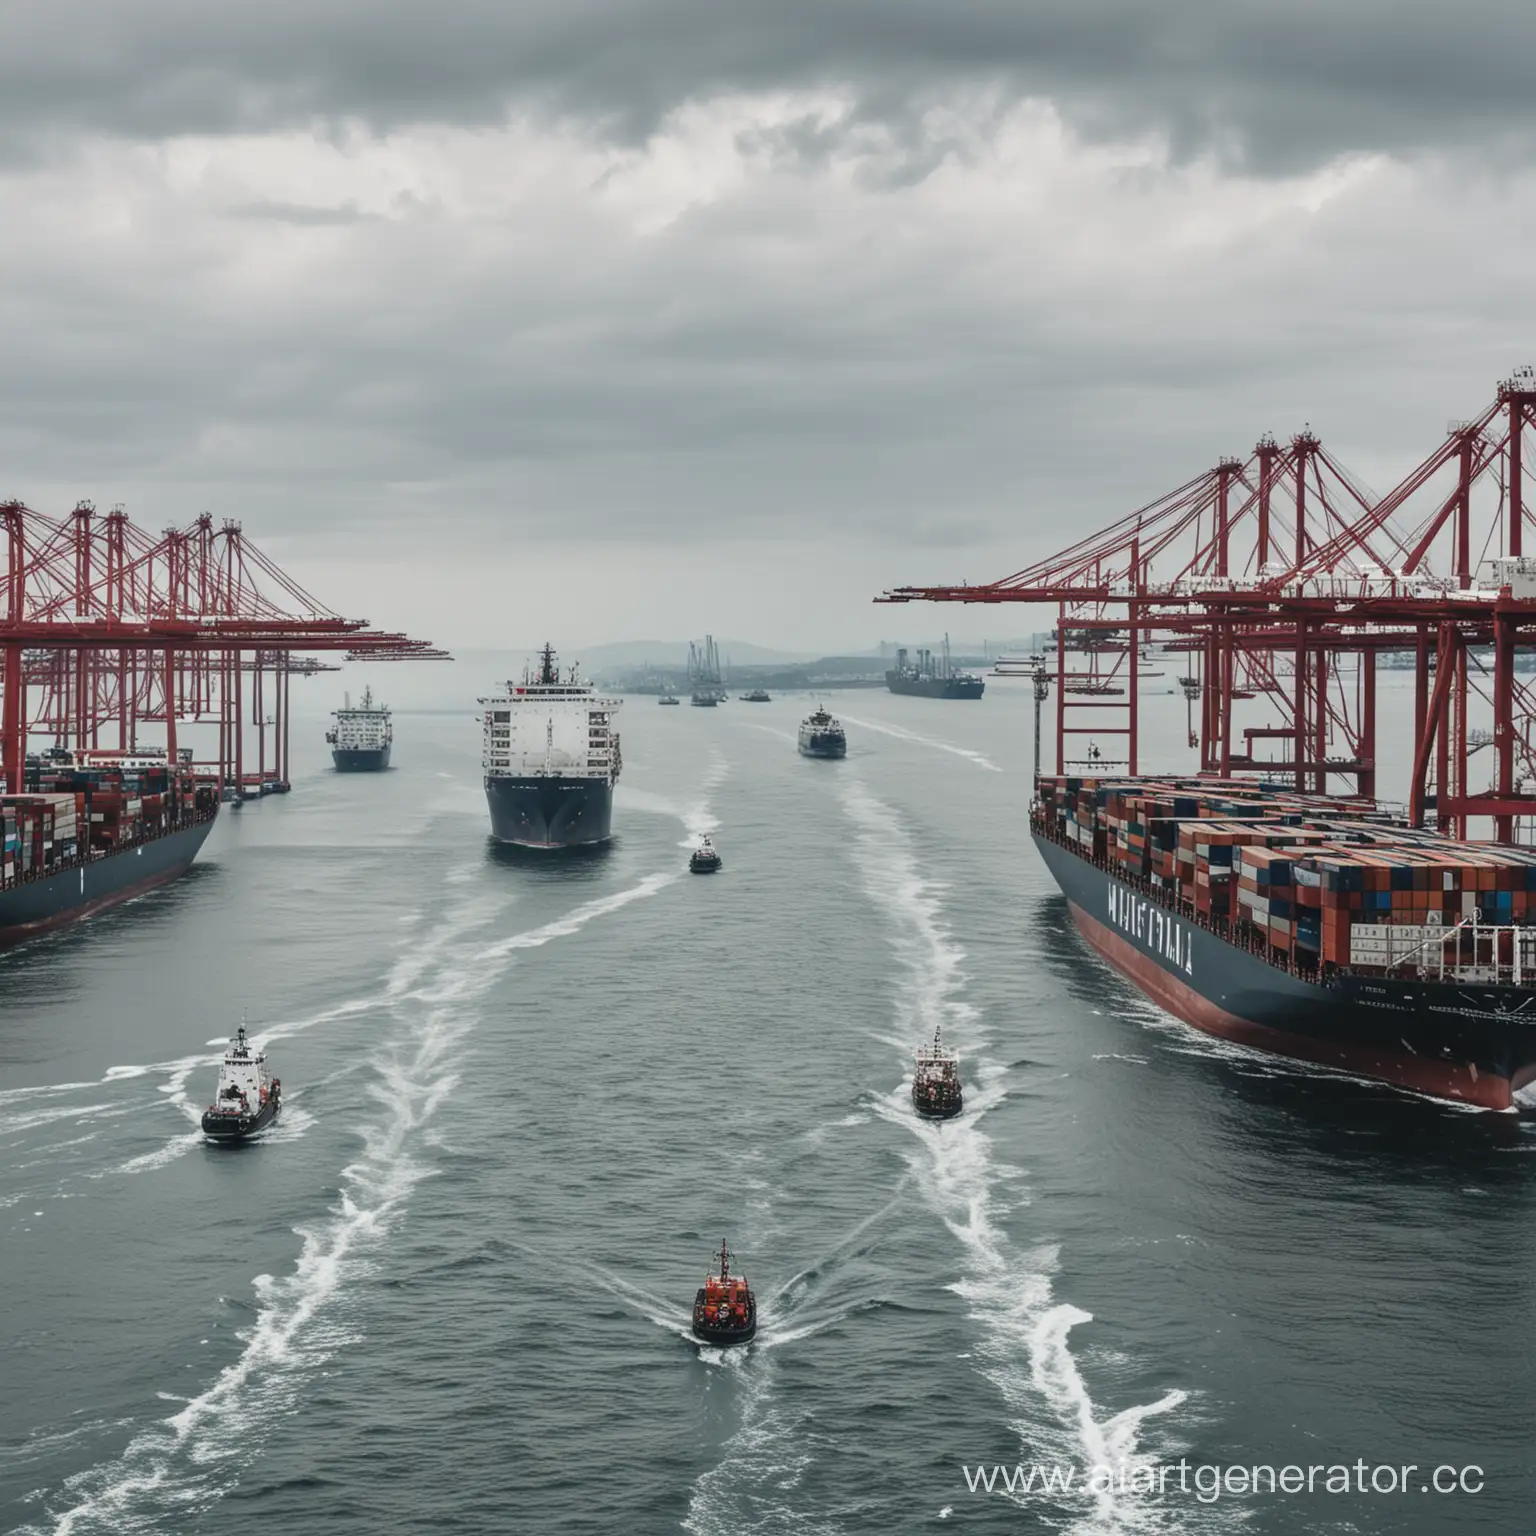 Challenges in Maritime Logistics
